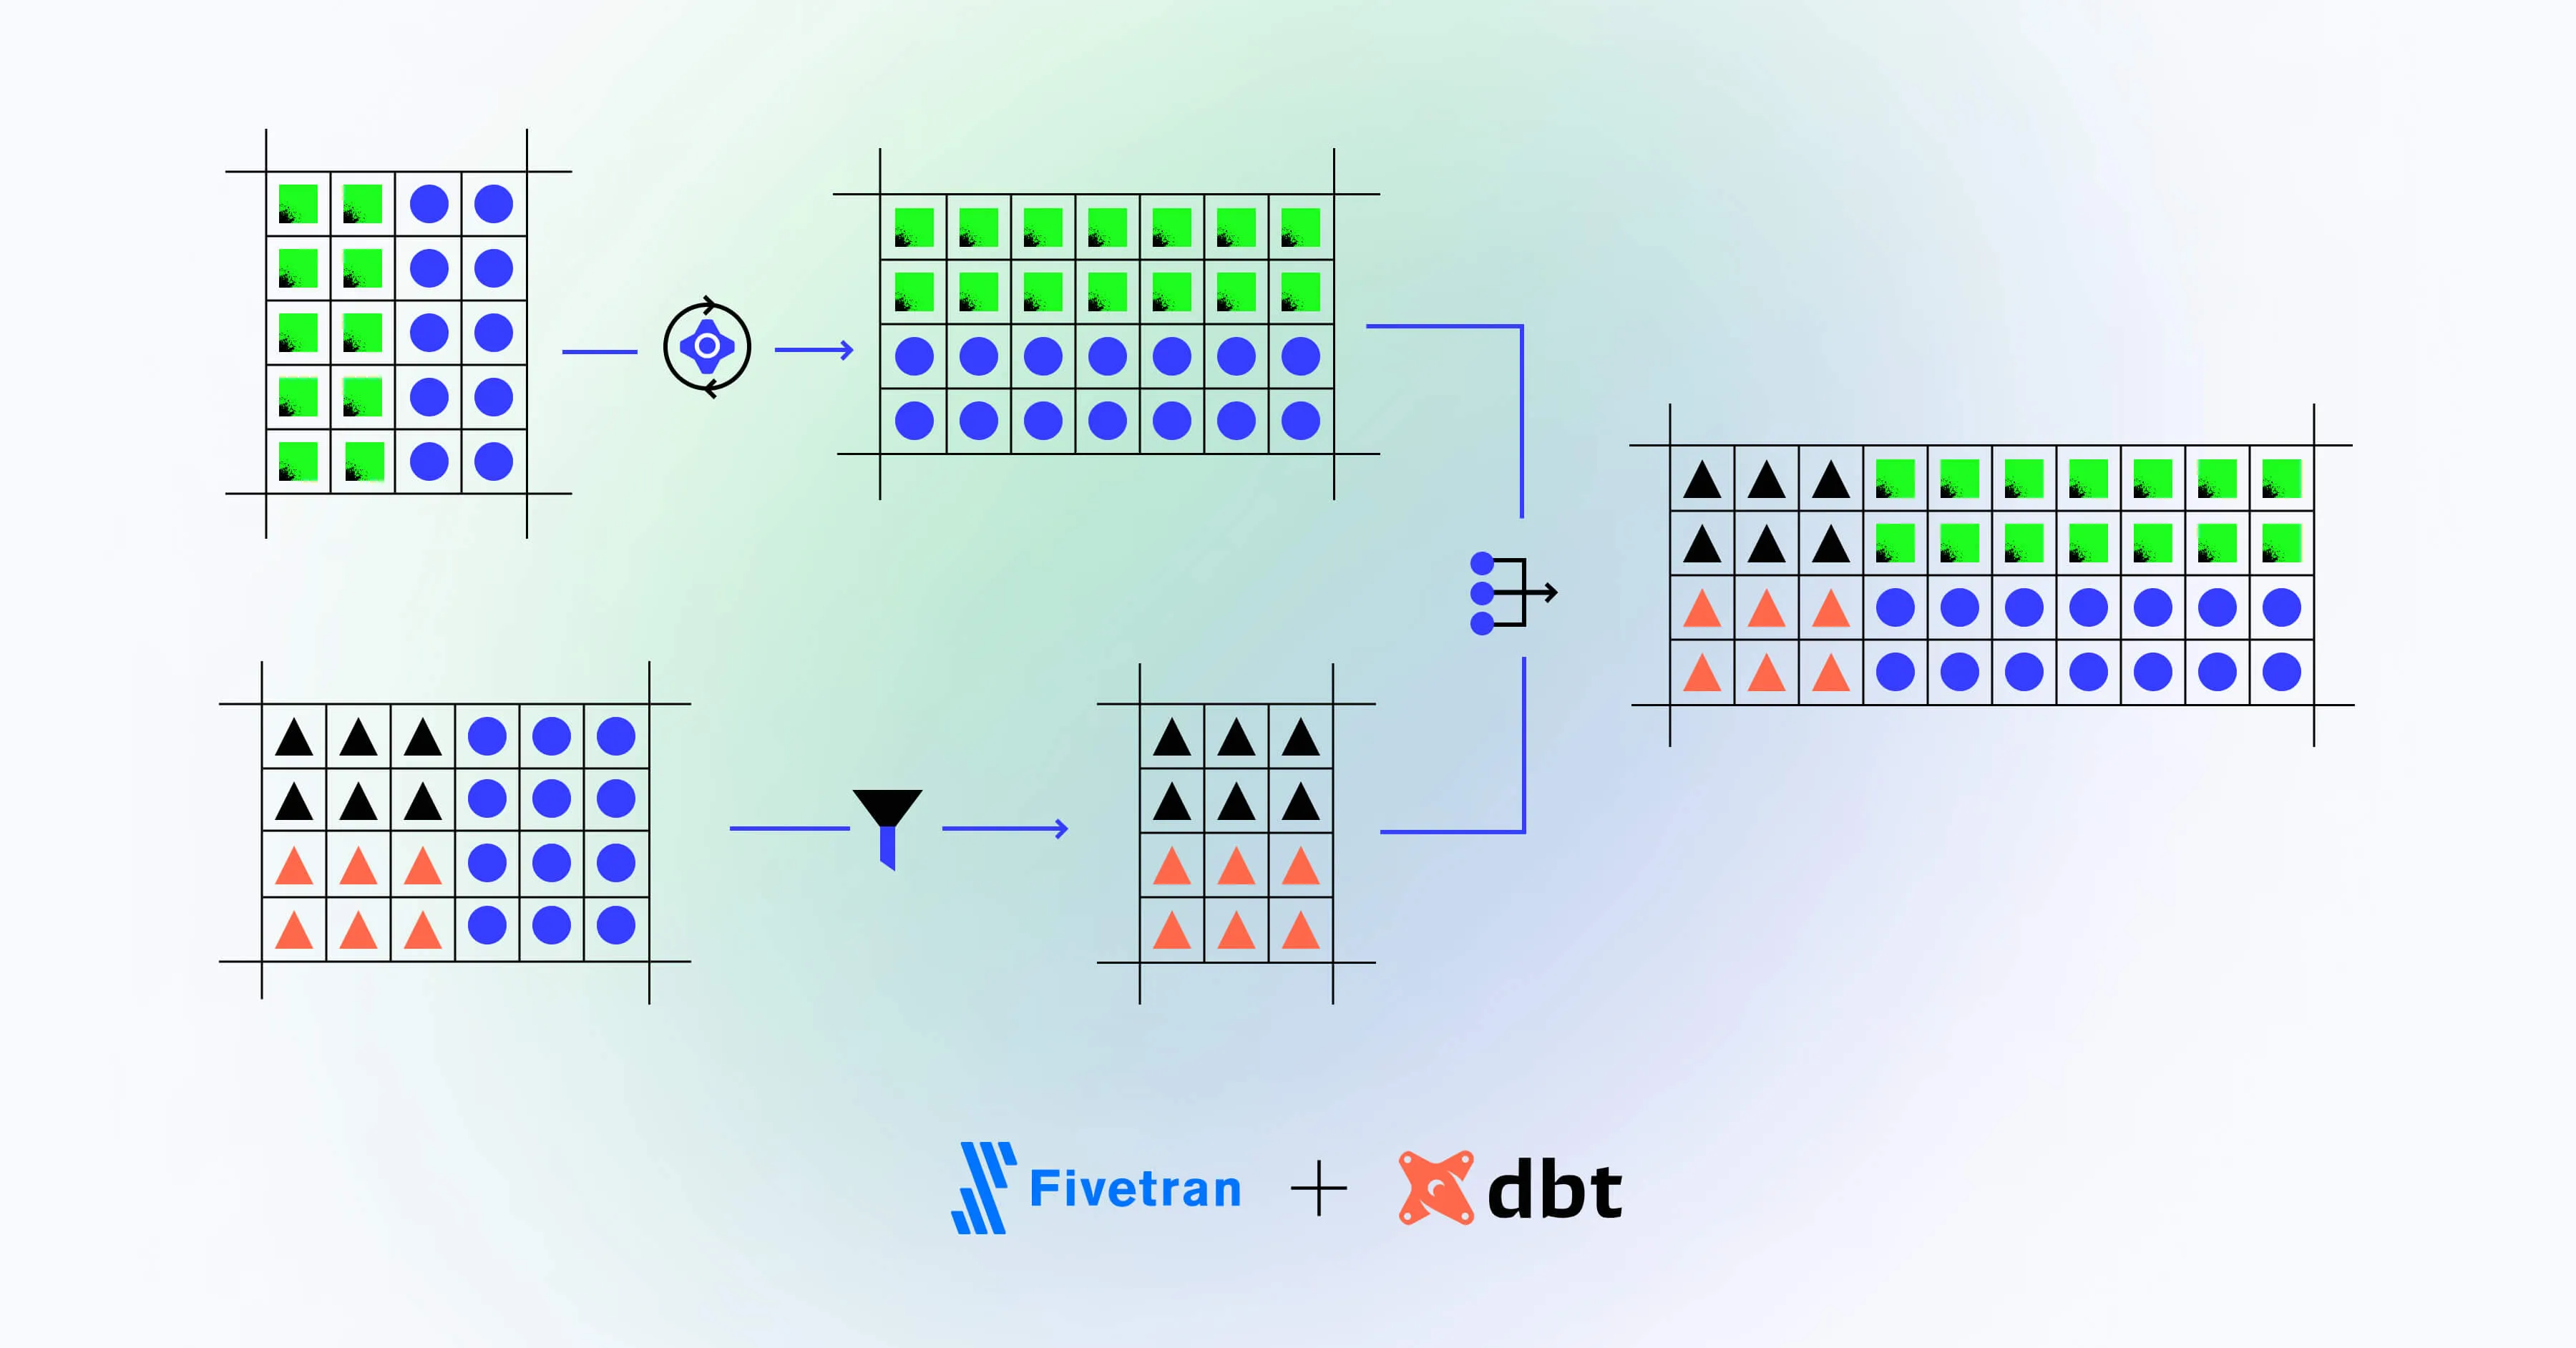 Using Fivetran and dbt to Extract and Transform Data